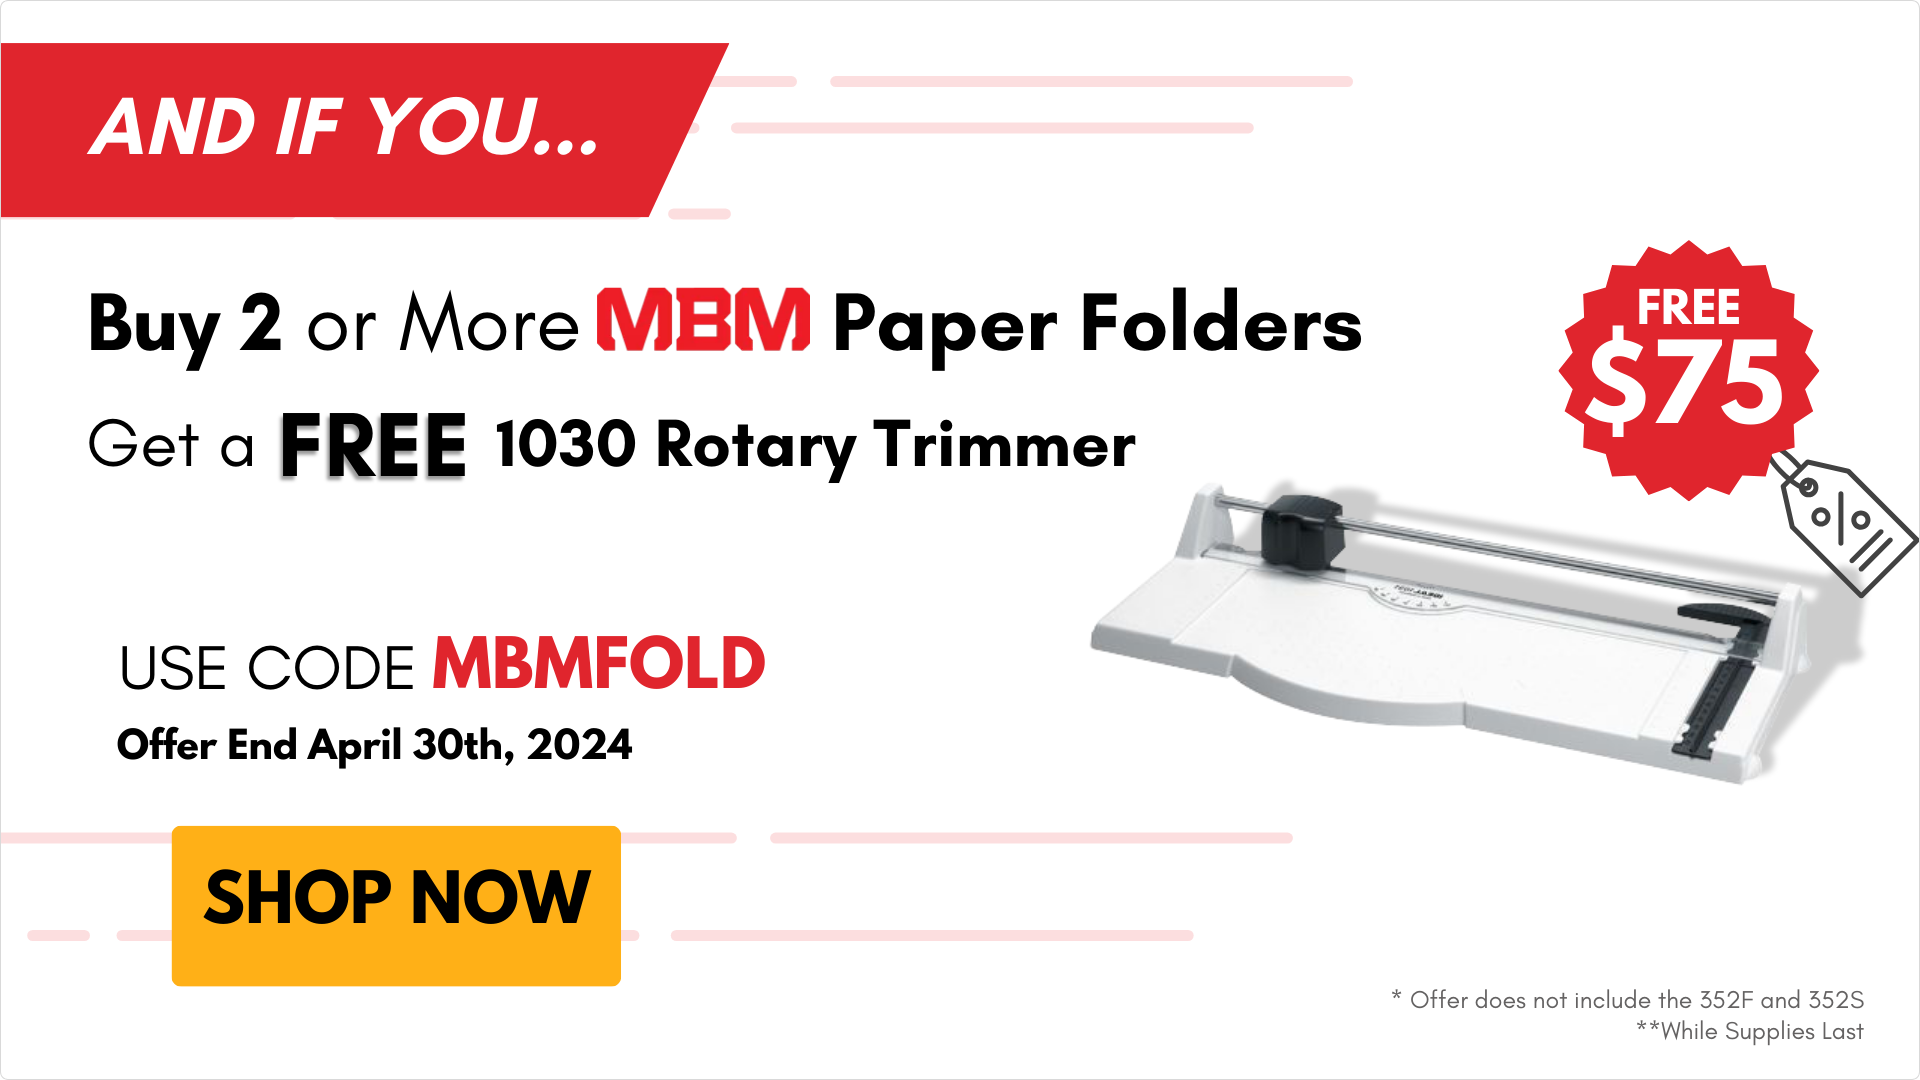 MBM Corporation Buy 2 Paper Folders and get a FREE 1030 Rotary Trimmer with code MBMFold good until April 20th, 2024